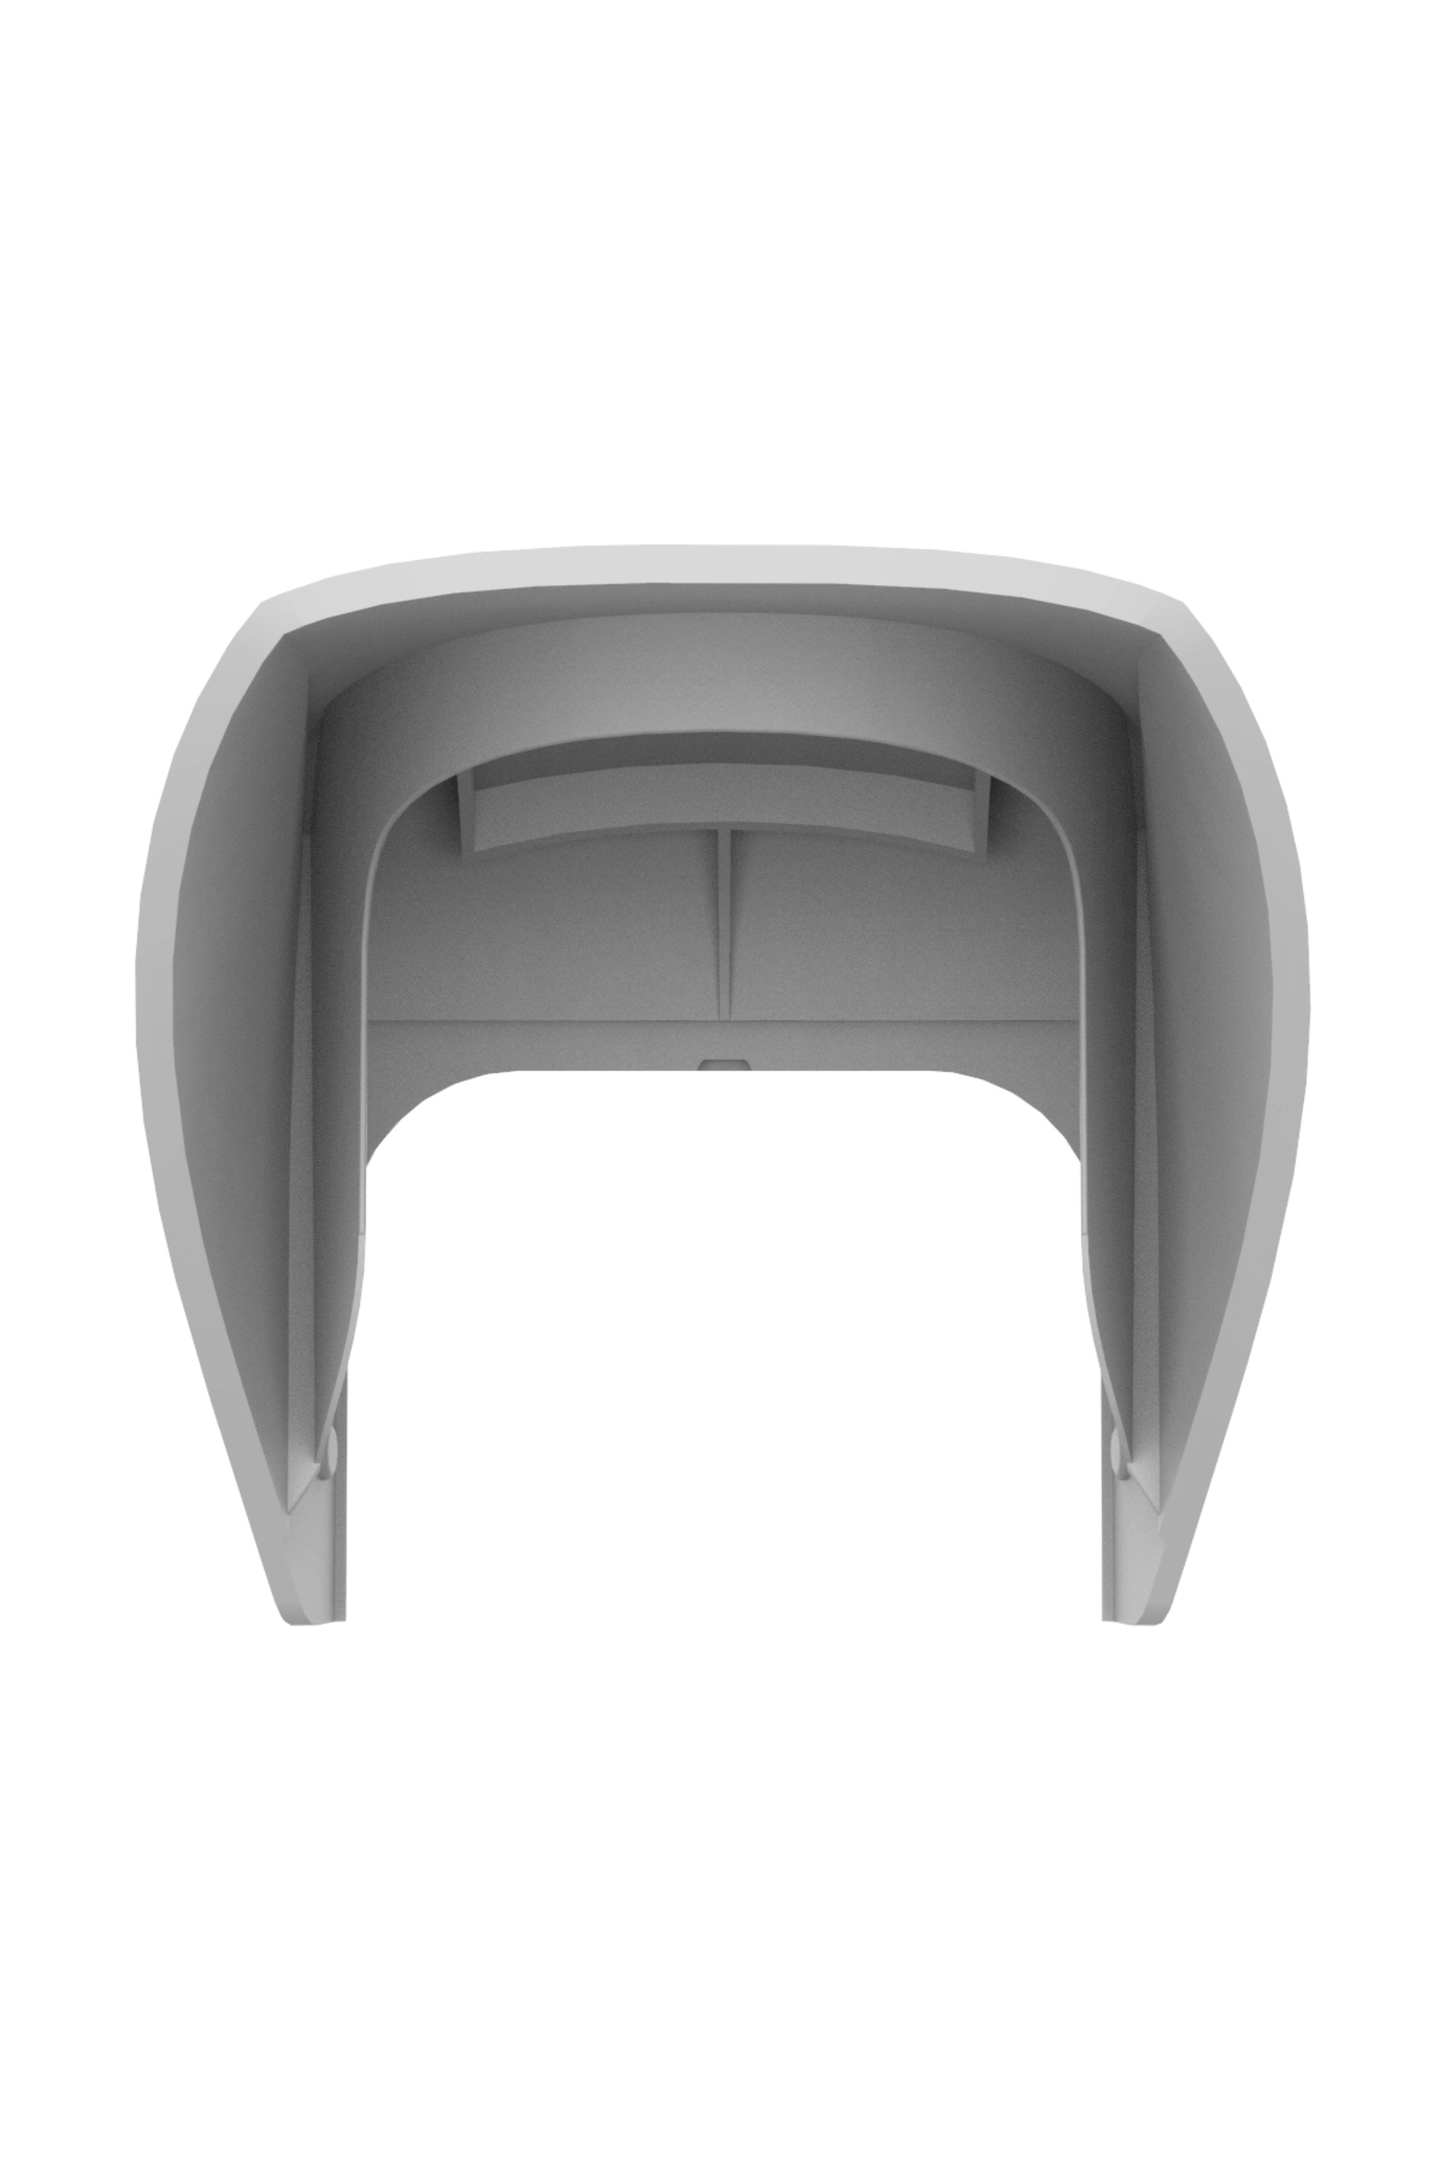 White Ajax hood for the Ajax MotionProtect outdoor motion detector, 110 × 96 × 90 mm in size. 71 g in weight. Made from Plastic, Front view of product